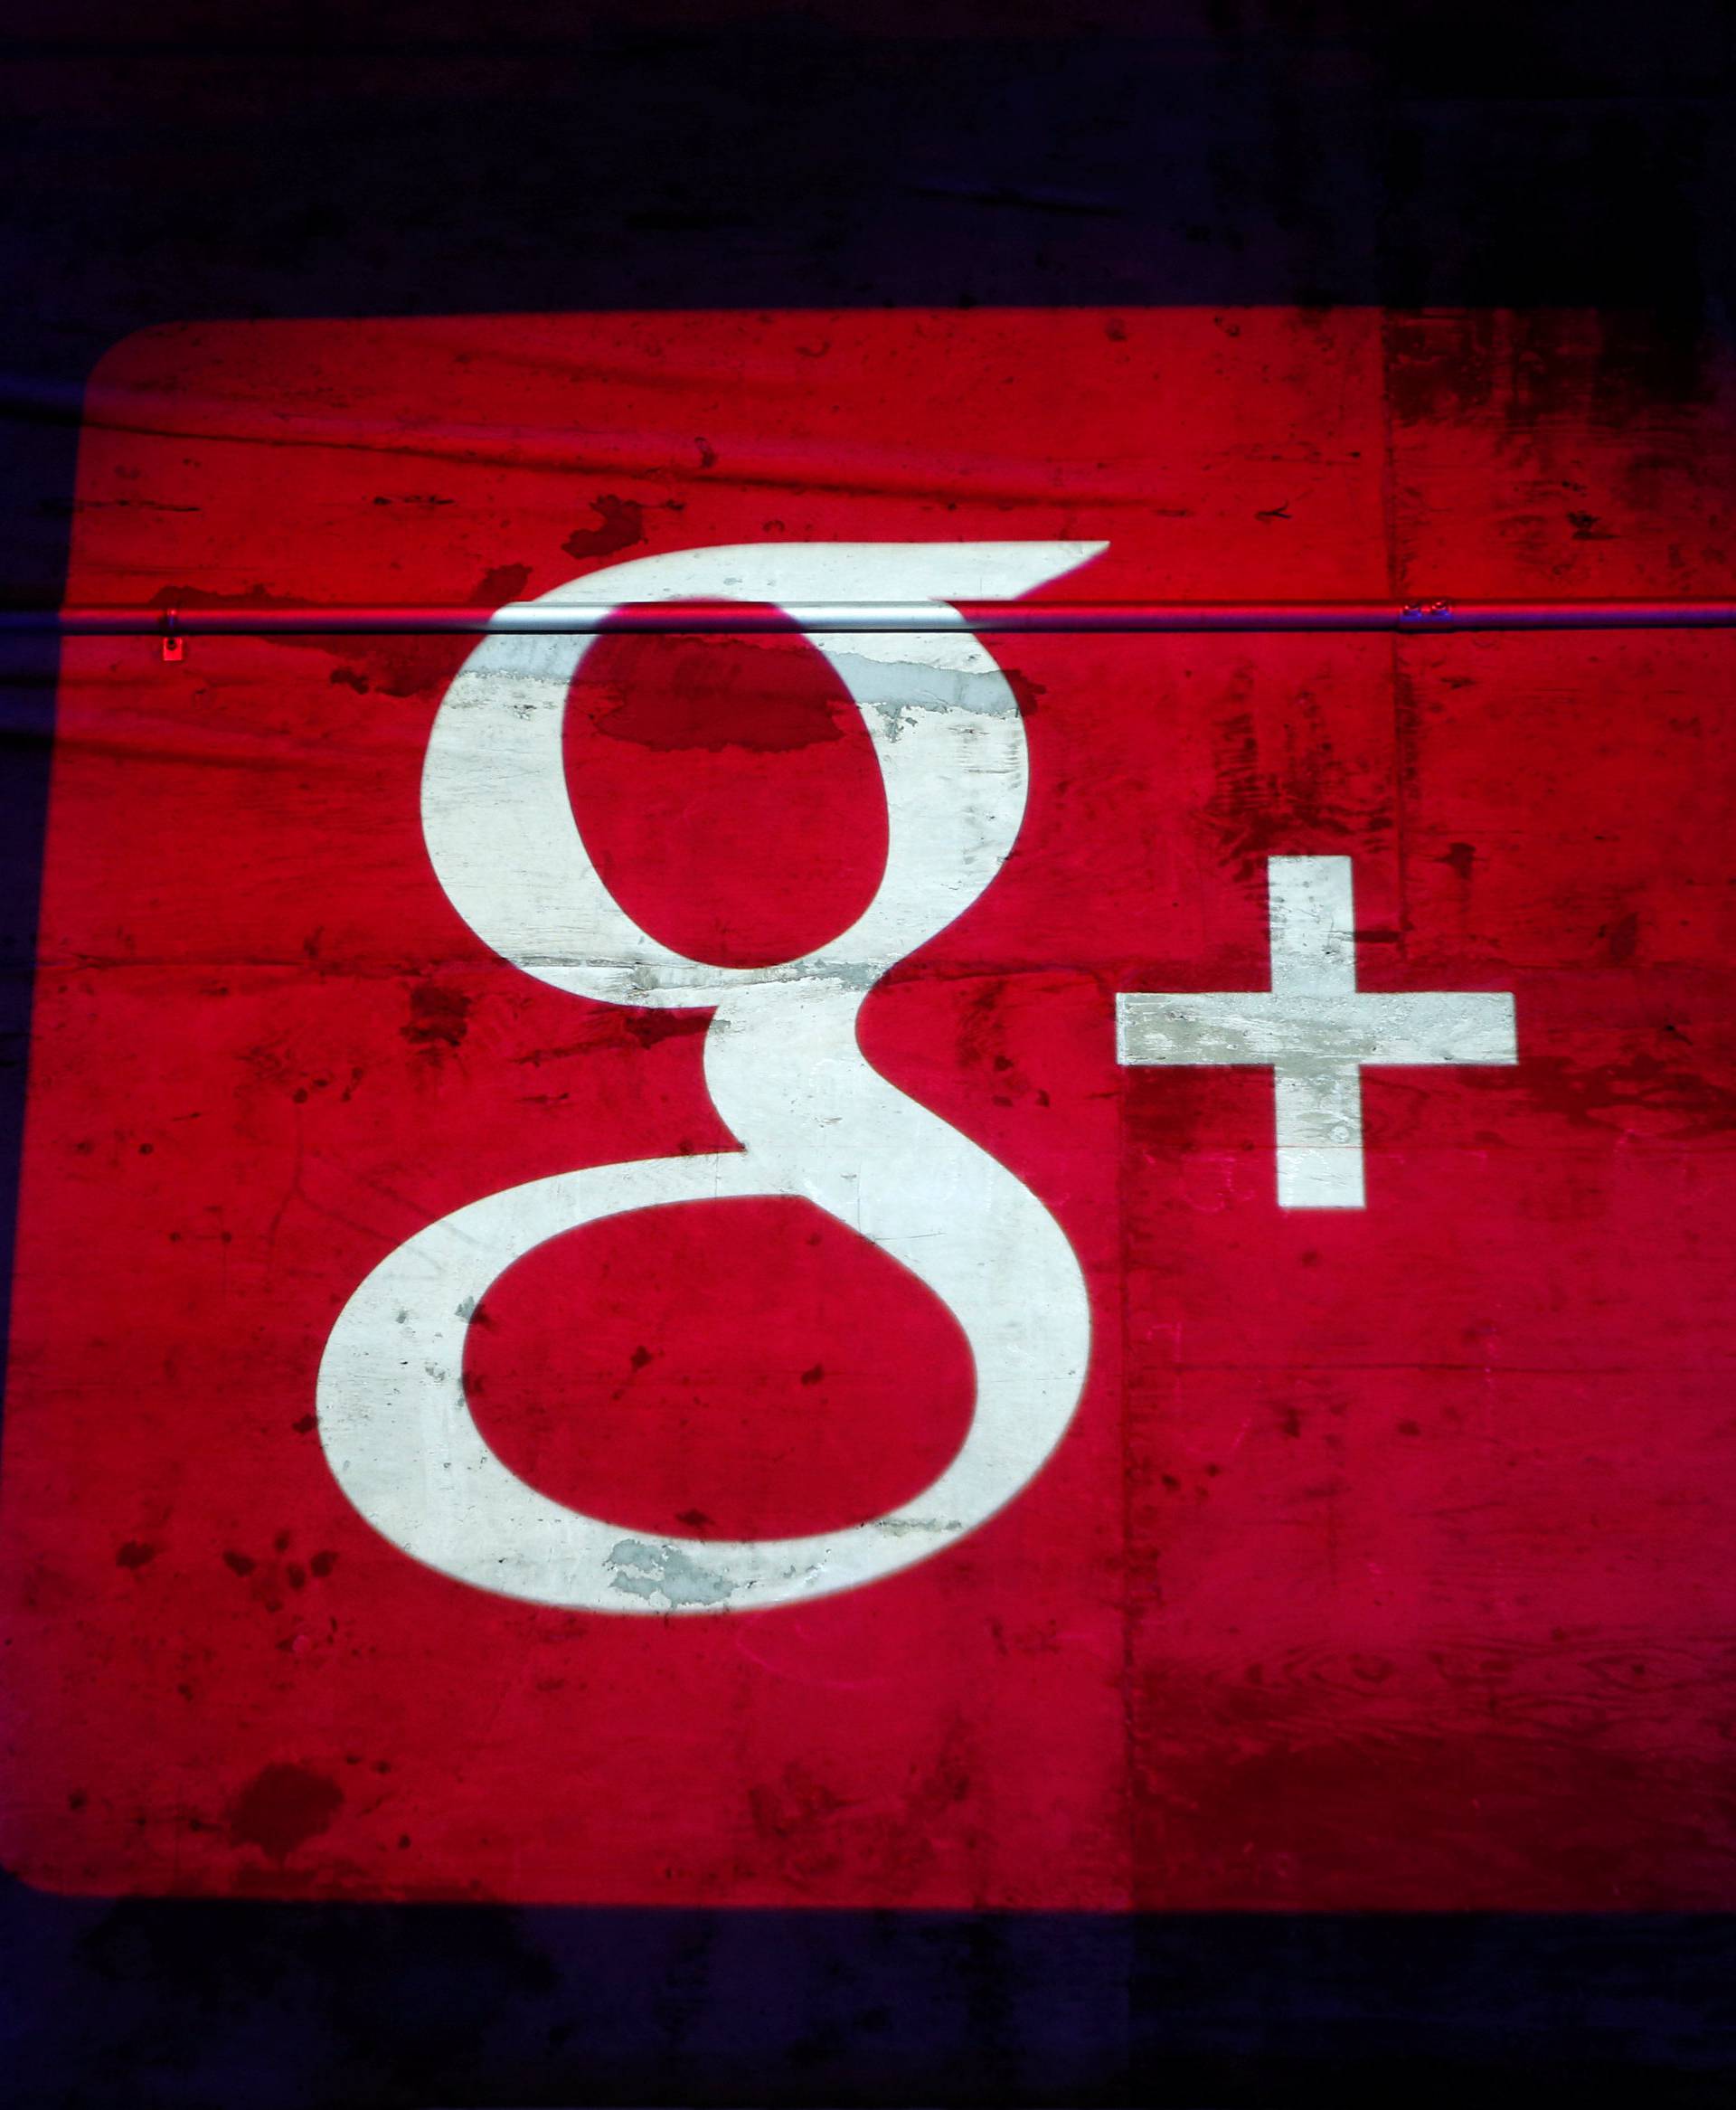 FILE PHOTO: Google Plus logo is projected on to the wall during a Google event in San Francisco